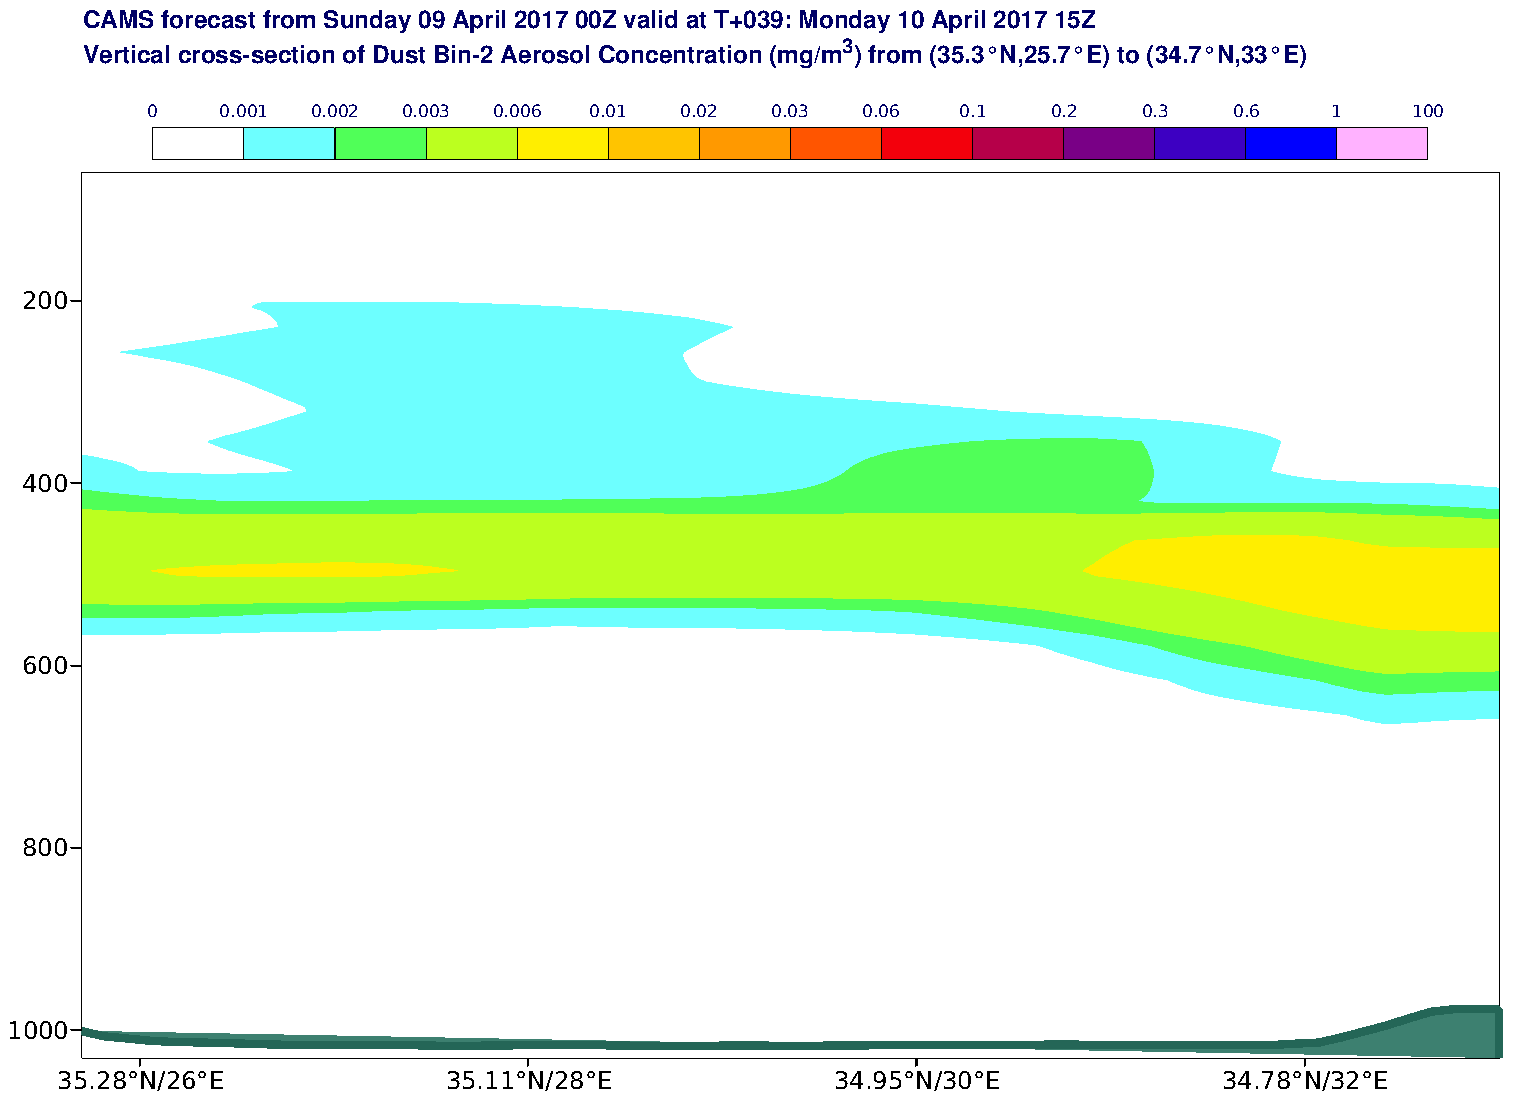 Vertical cross-section of Dust Bin-2 Aerosol Concentration (mg/m3) valid at T39 - 2017-04-10 15:00